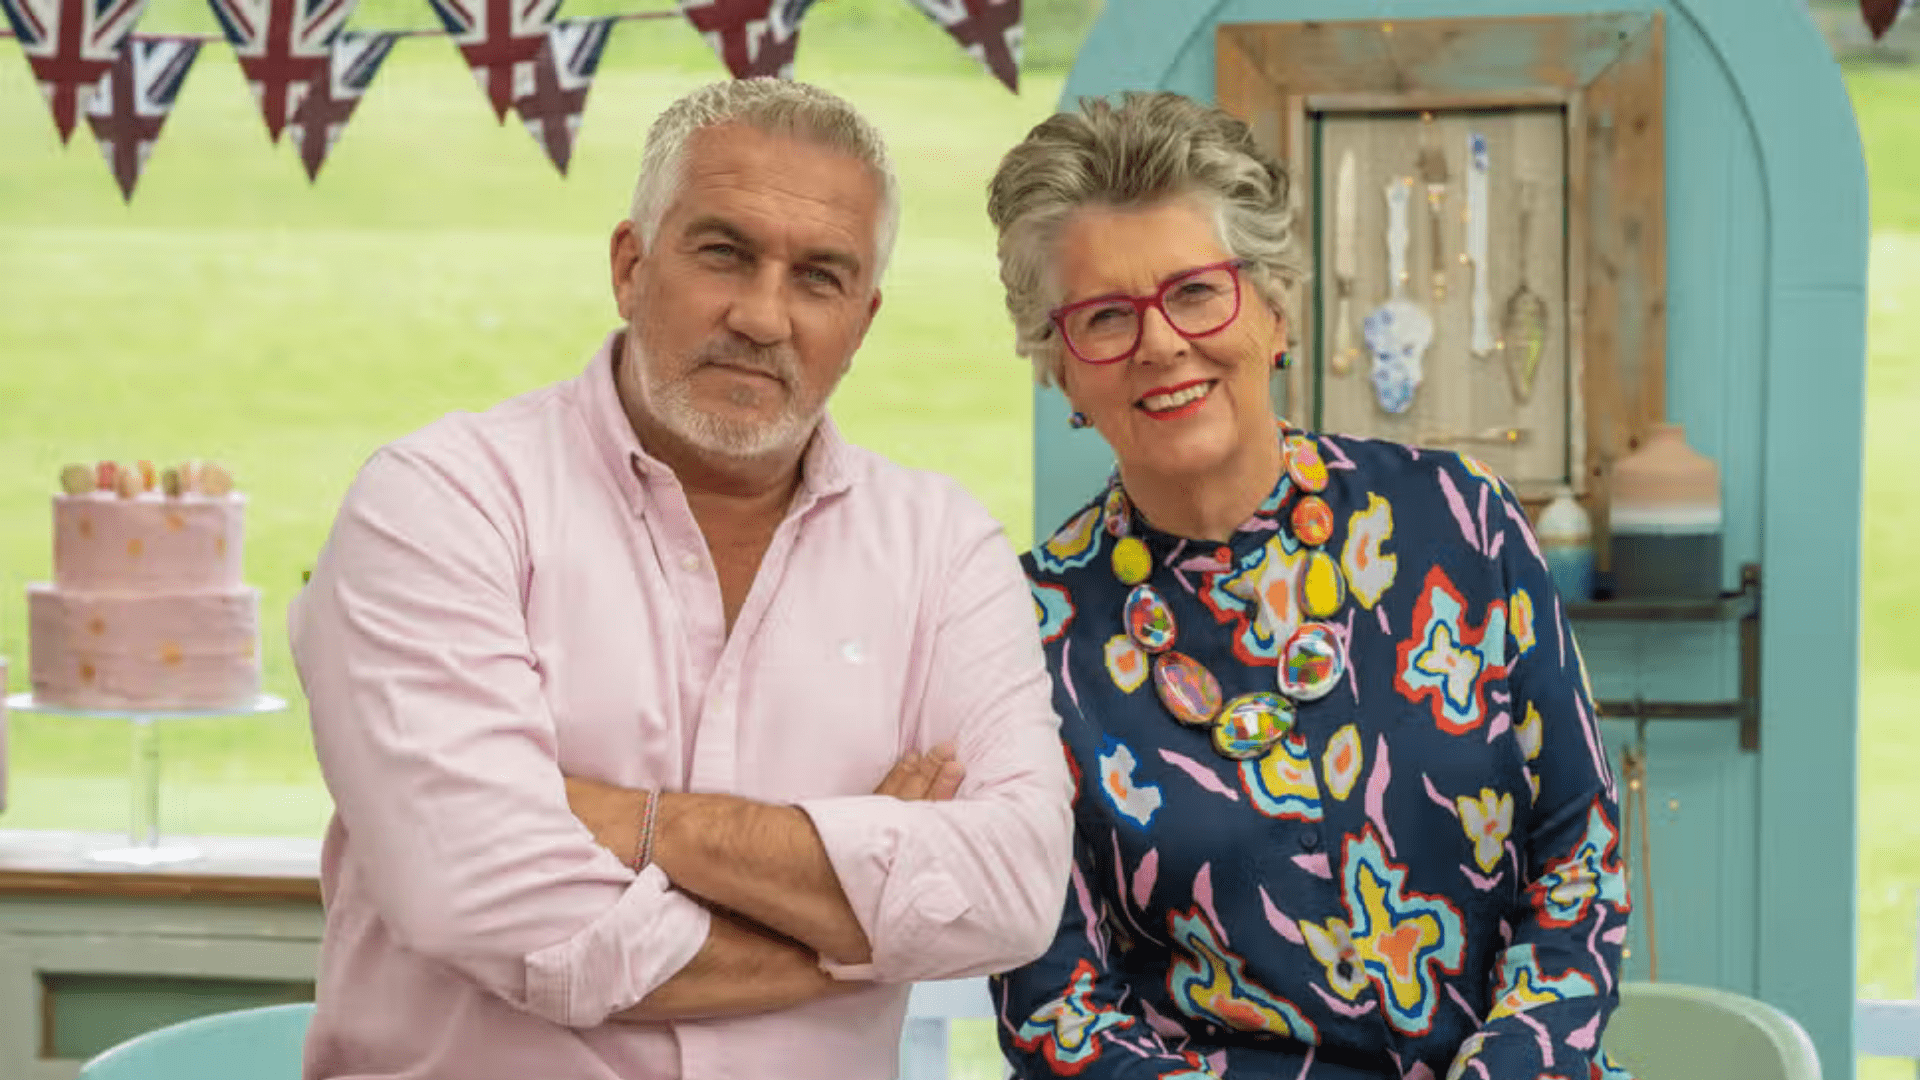 46 The Great British Bake Off Facts All The Star Bakers Should Know - The Great British Bake Off Facts